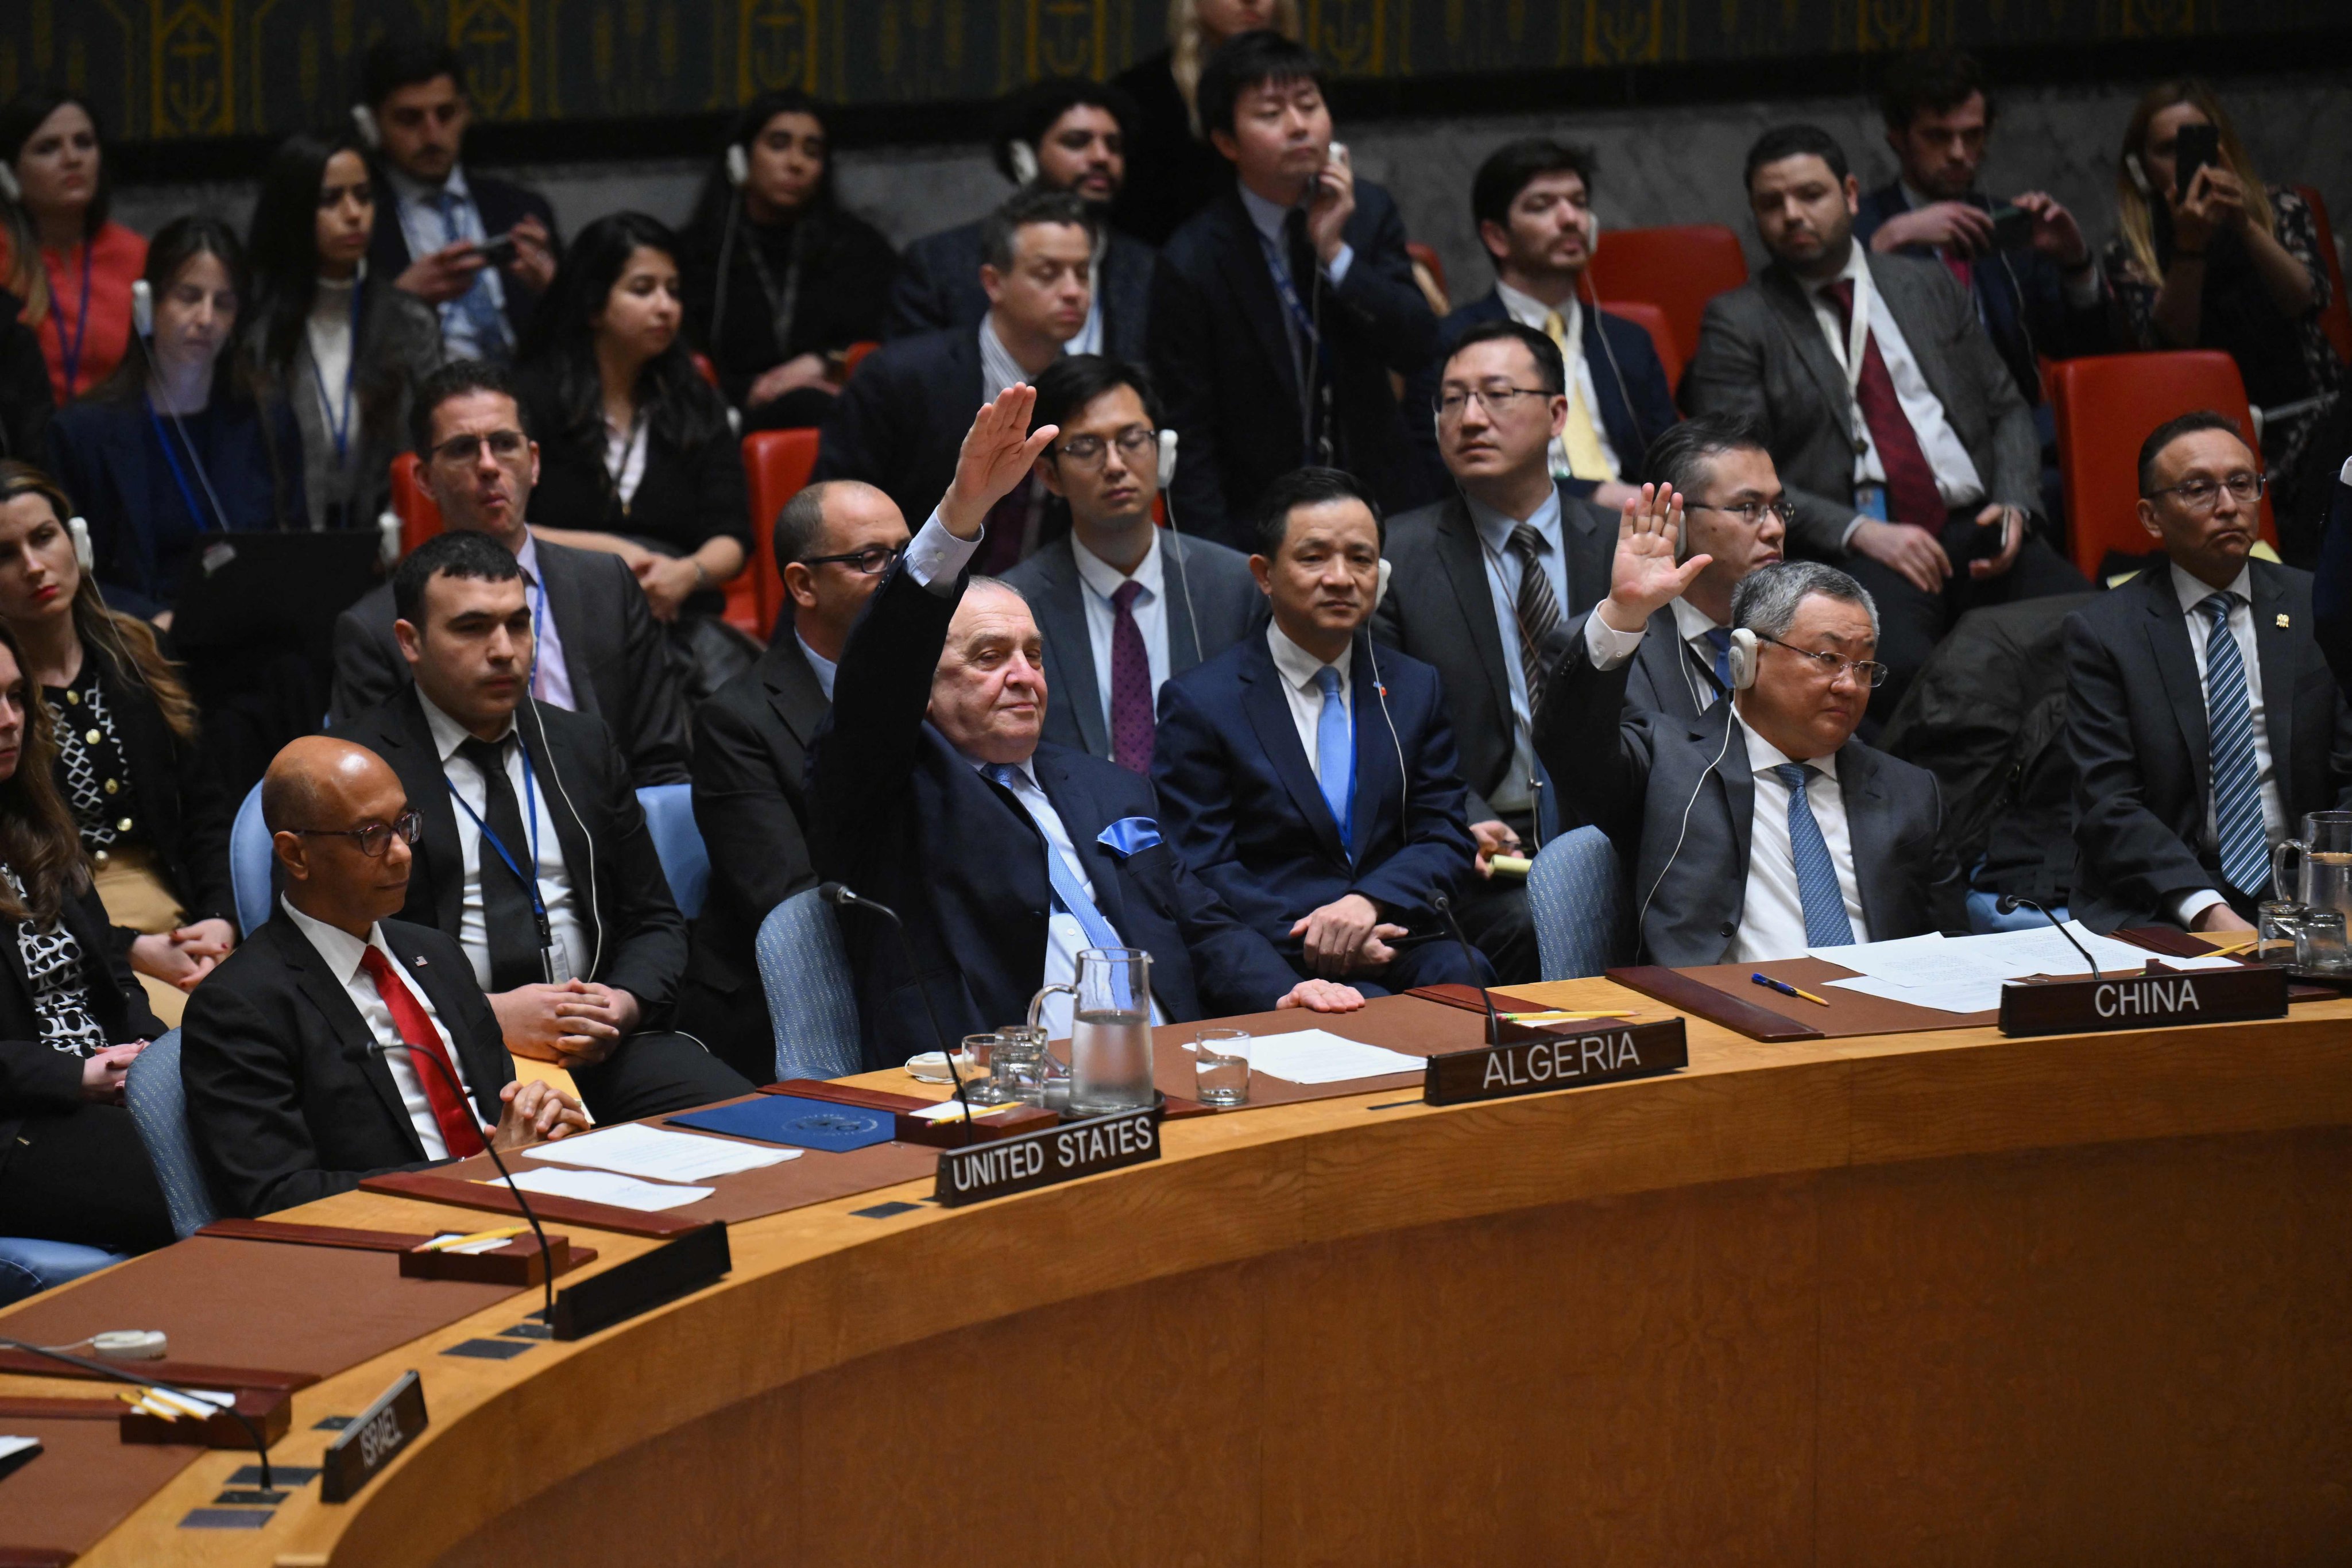 The UN Security Council votes on a resolution allowing Palestinian UN membership at the United Nations headquarters in New York on Thursday. Photo: AFP